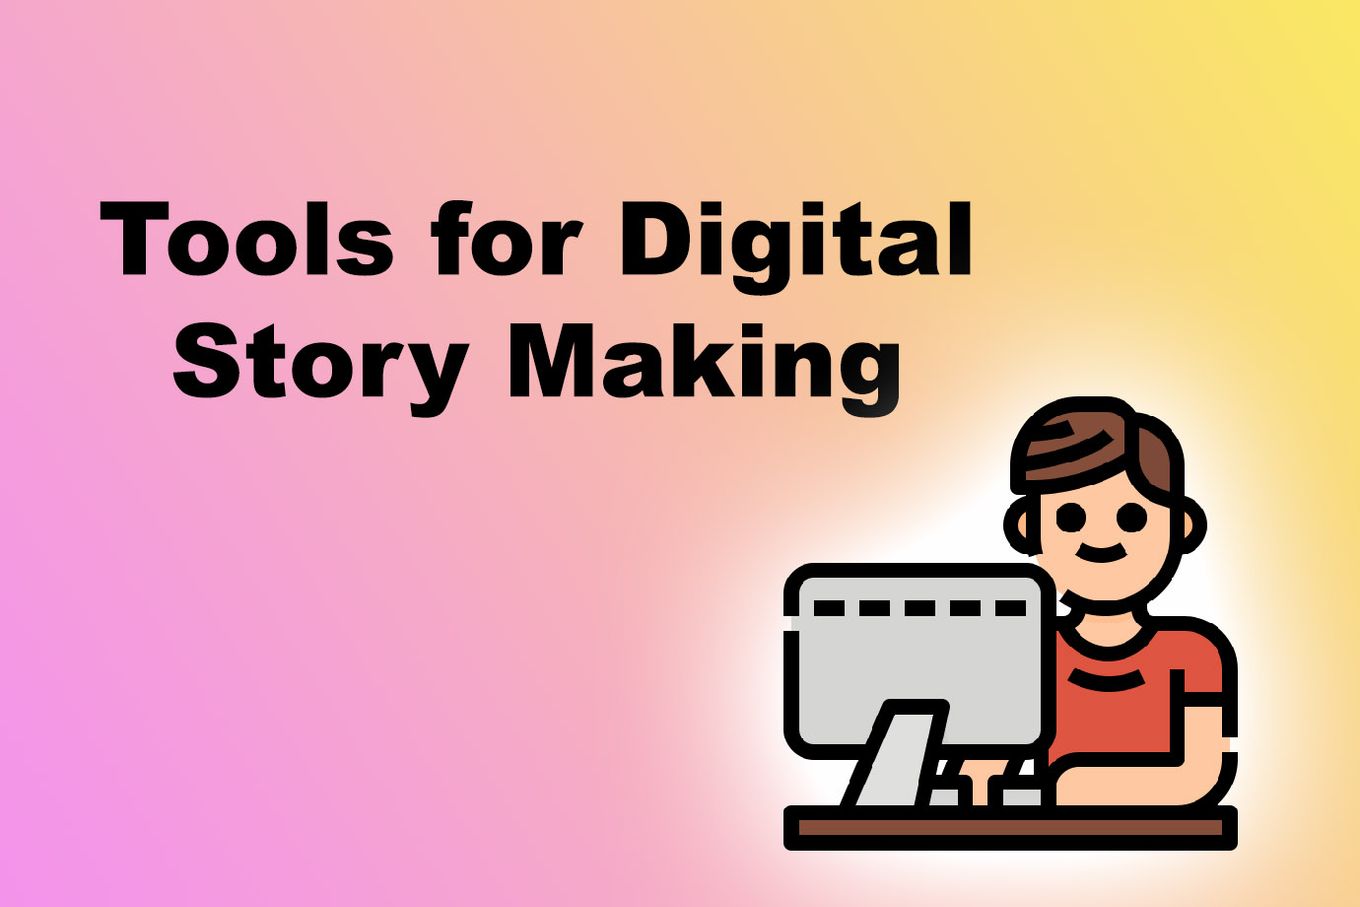 Tools for Digital Story Making